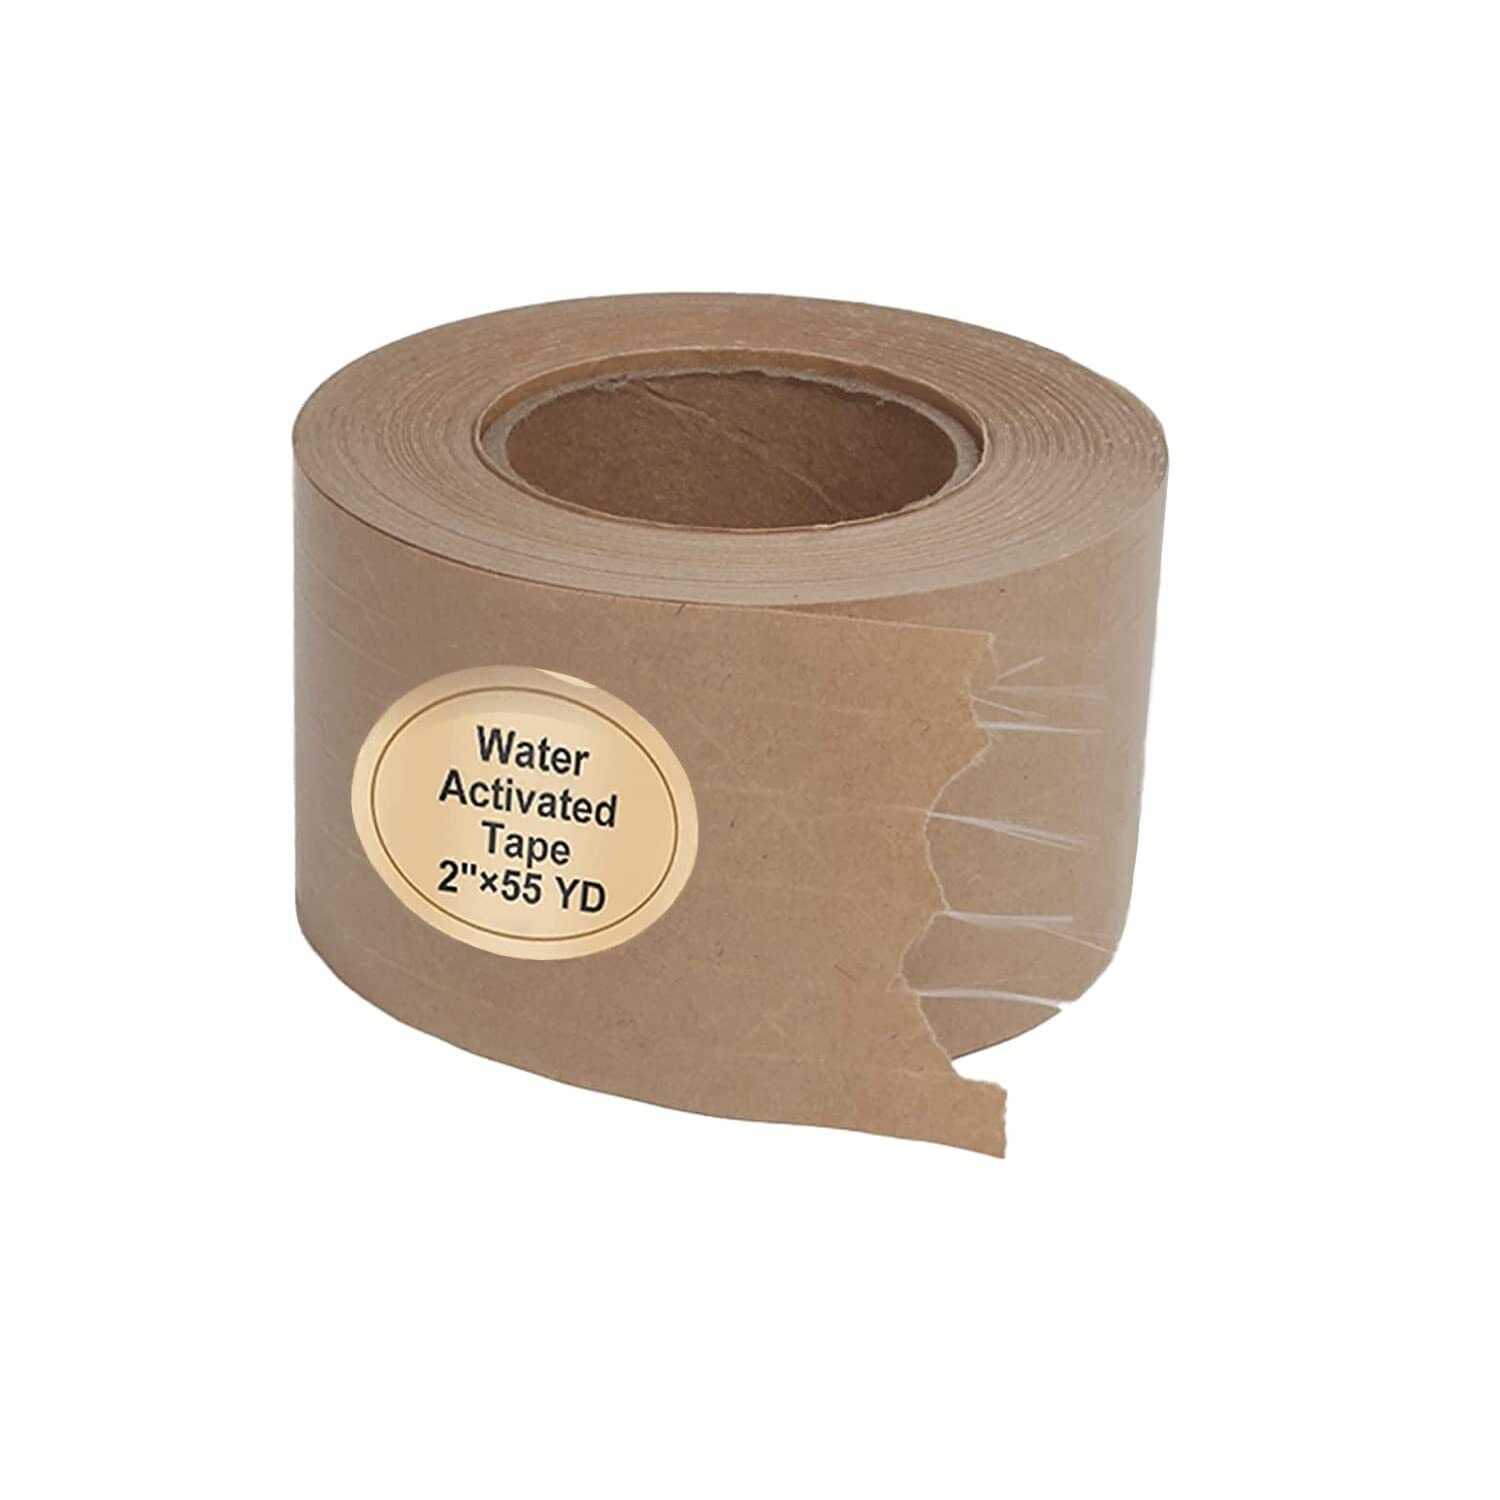 Water Activated Tape Brown Reinforced Kraft Paper Carton Sealing Gummed Tape